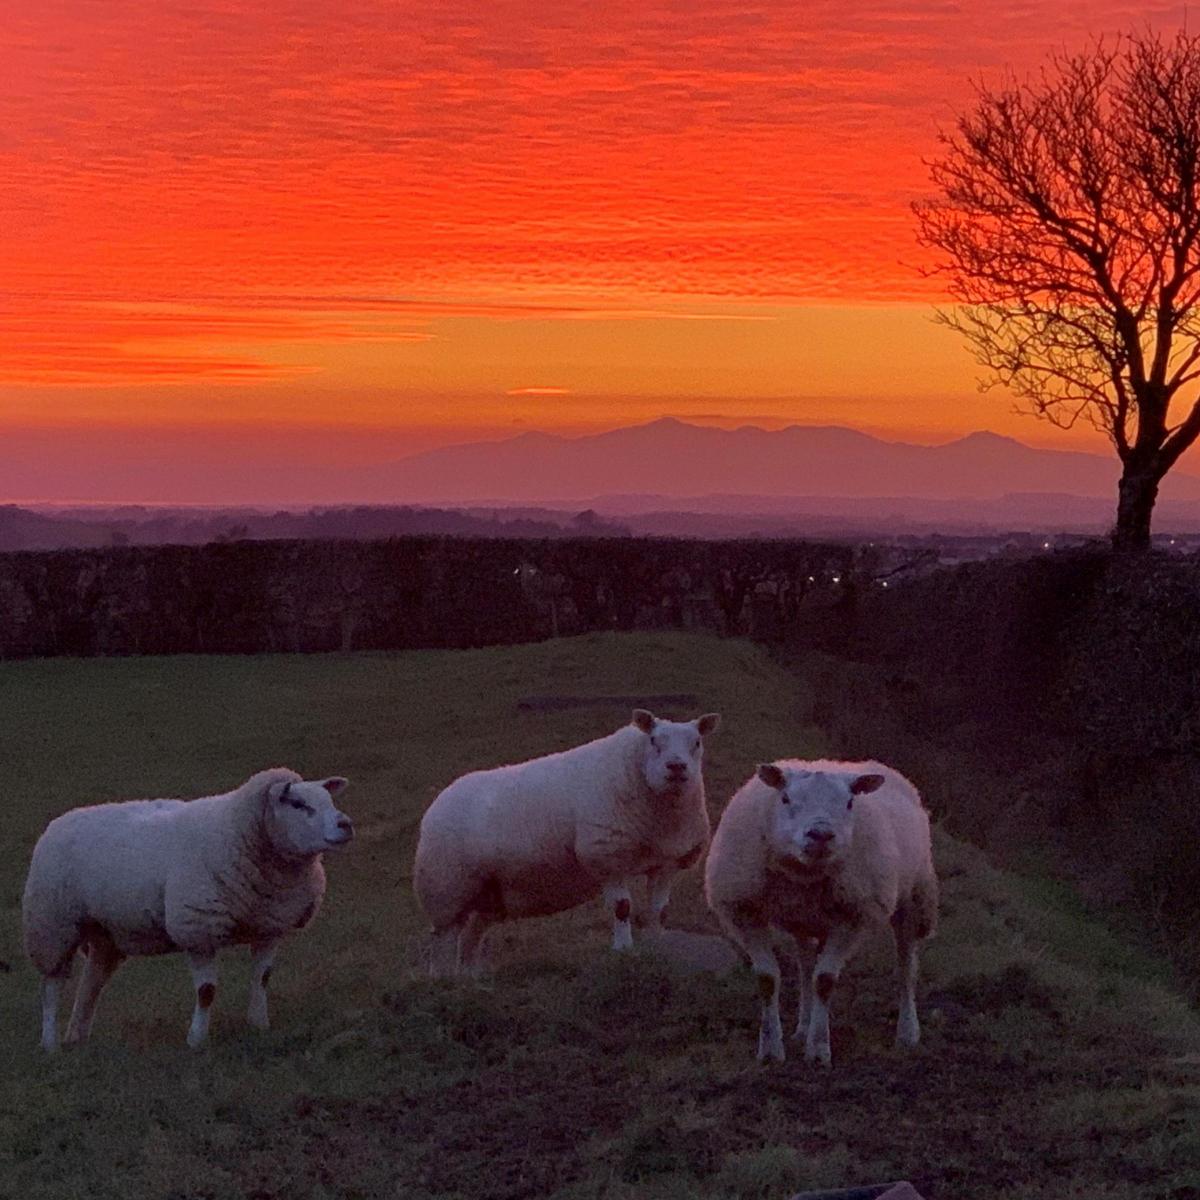 David Currans - Red sky at night, shepherds delight. Texel lambs with Arran in the background